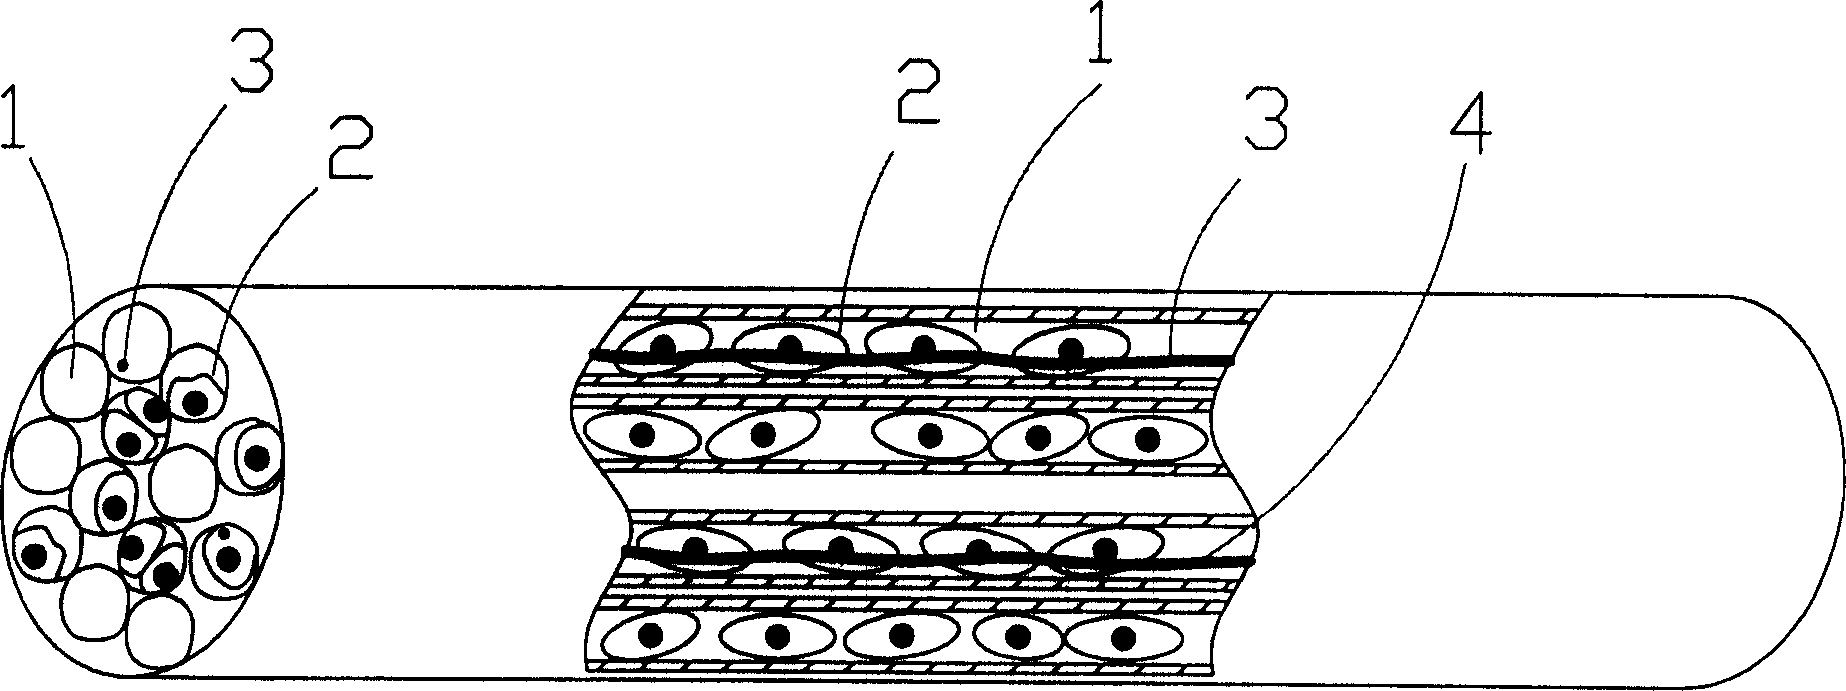 Tissue engineering bone containing innervation and its construction